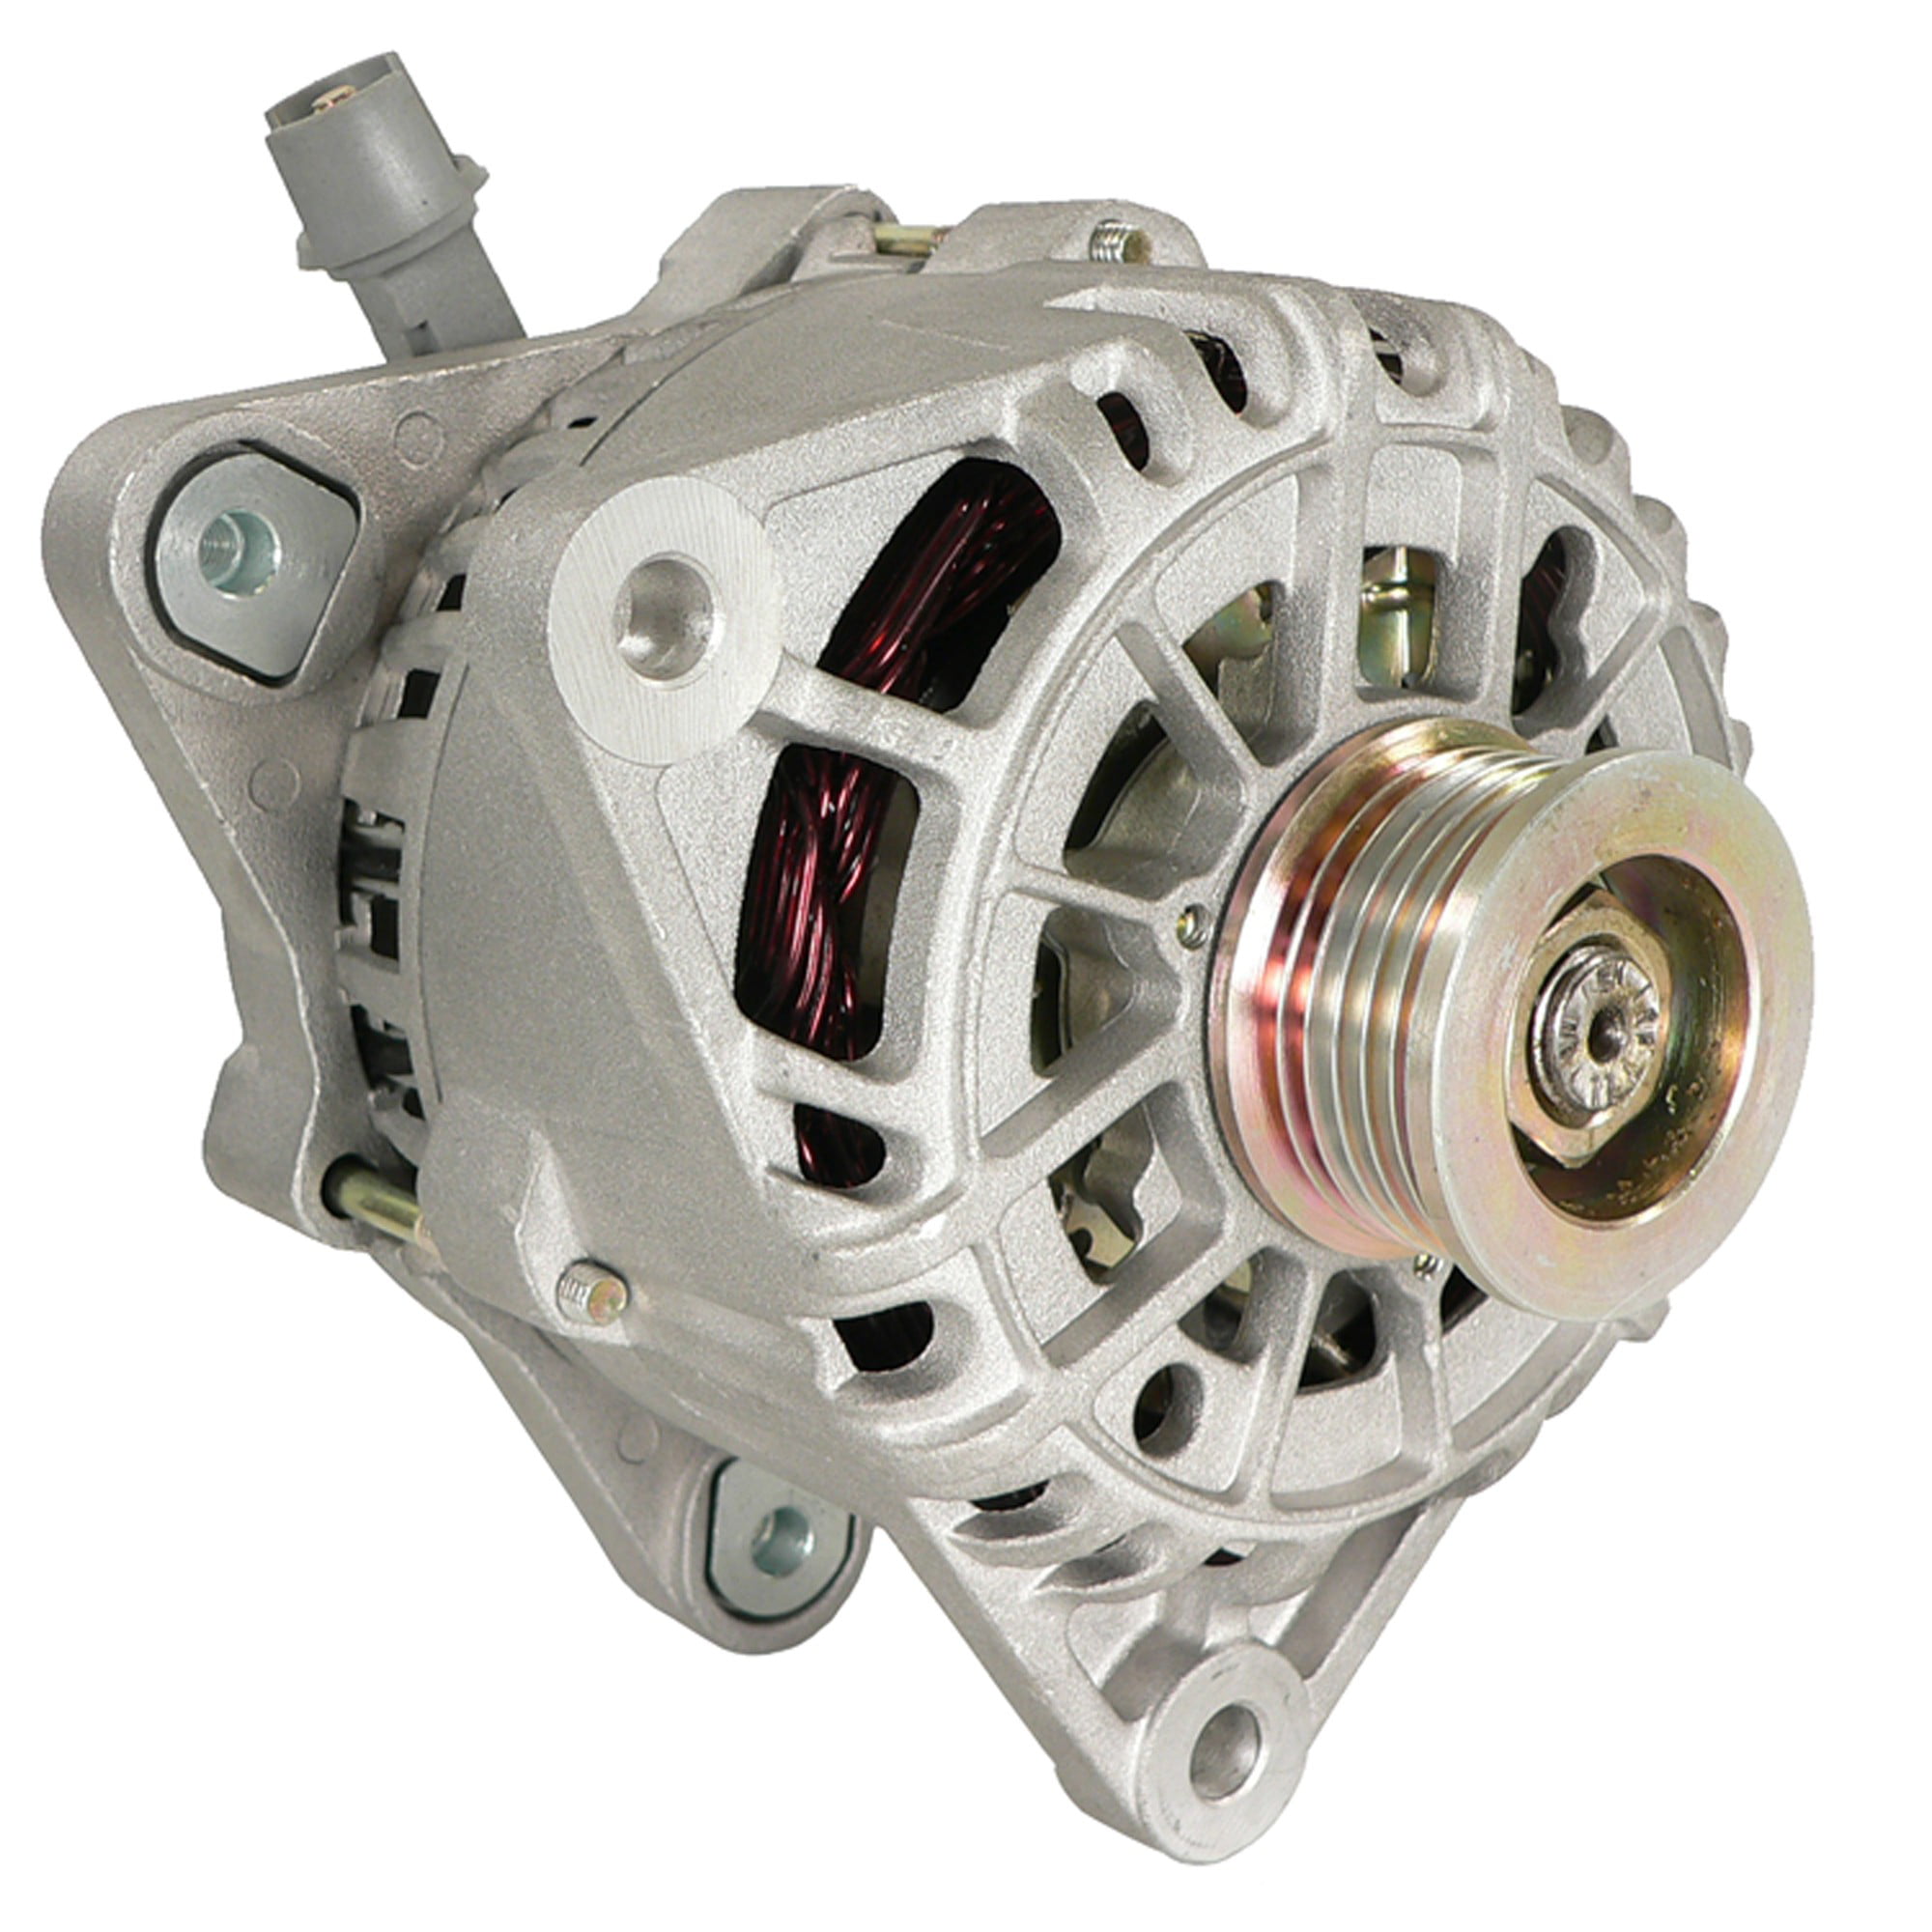 L4 Alternator Compatible with/Replacement for Ford Auto And Light Truck Focus 2003 2.0L 121 